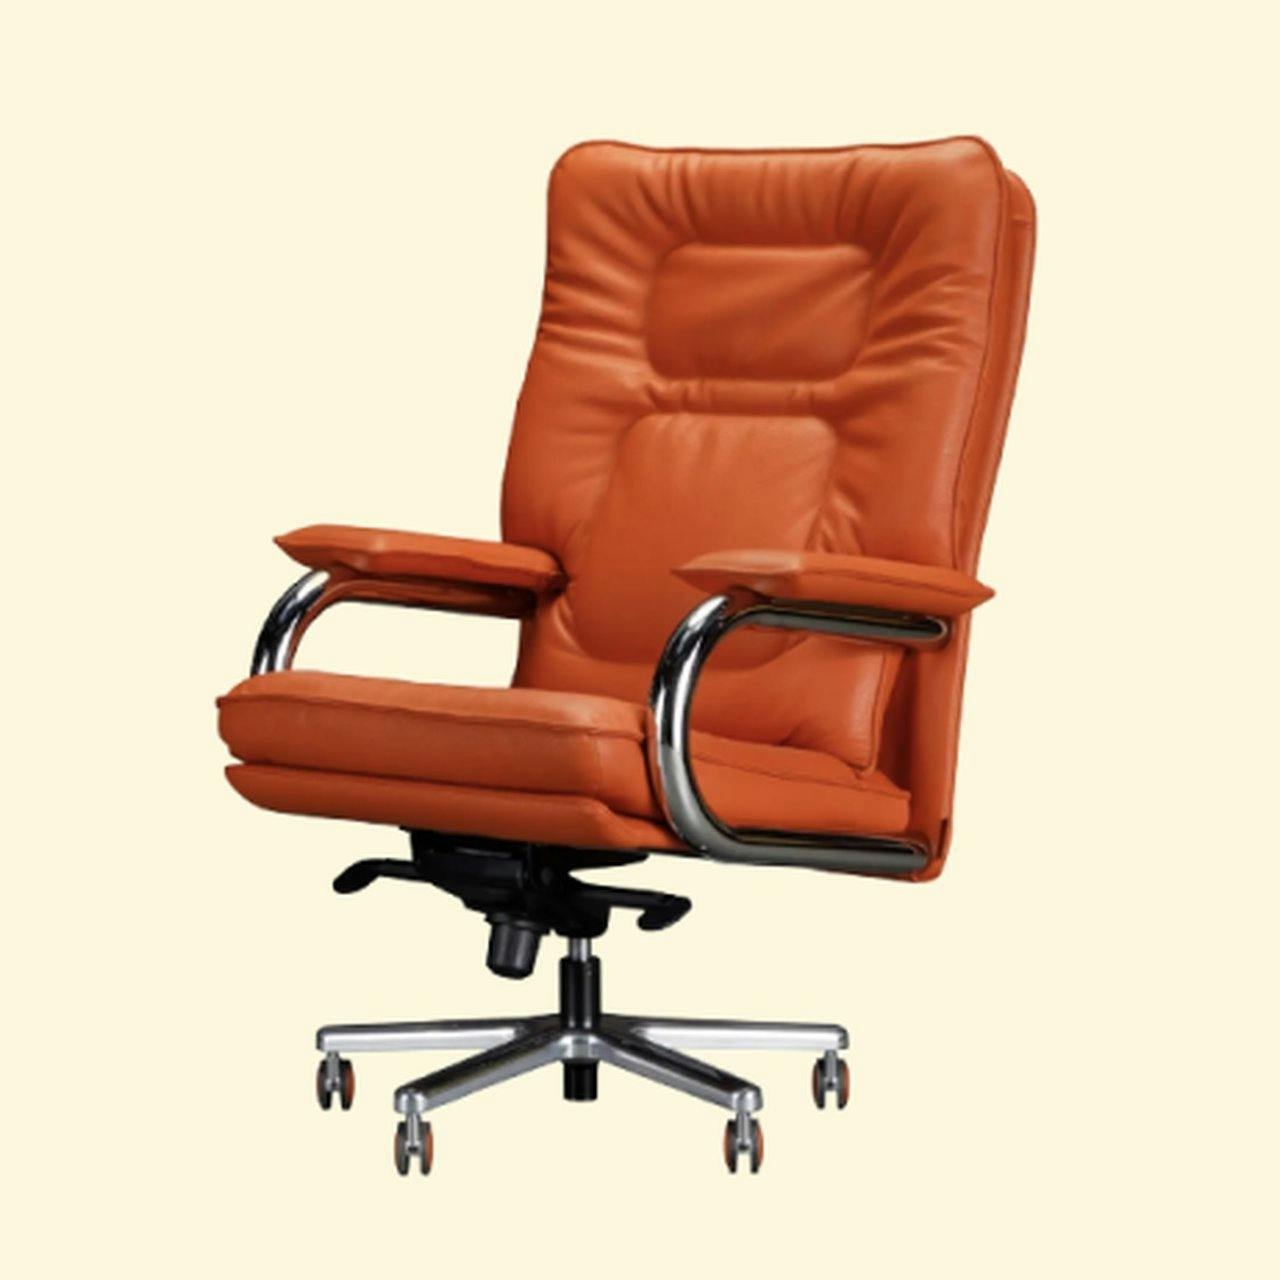 Emeco Office chairs